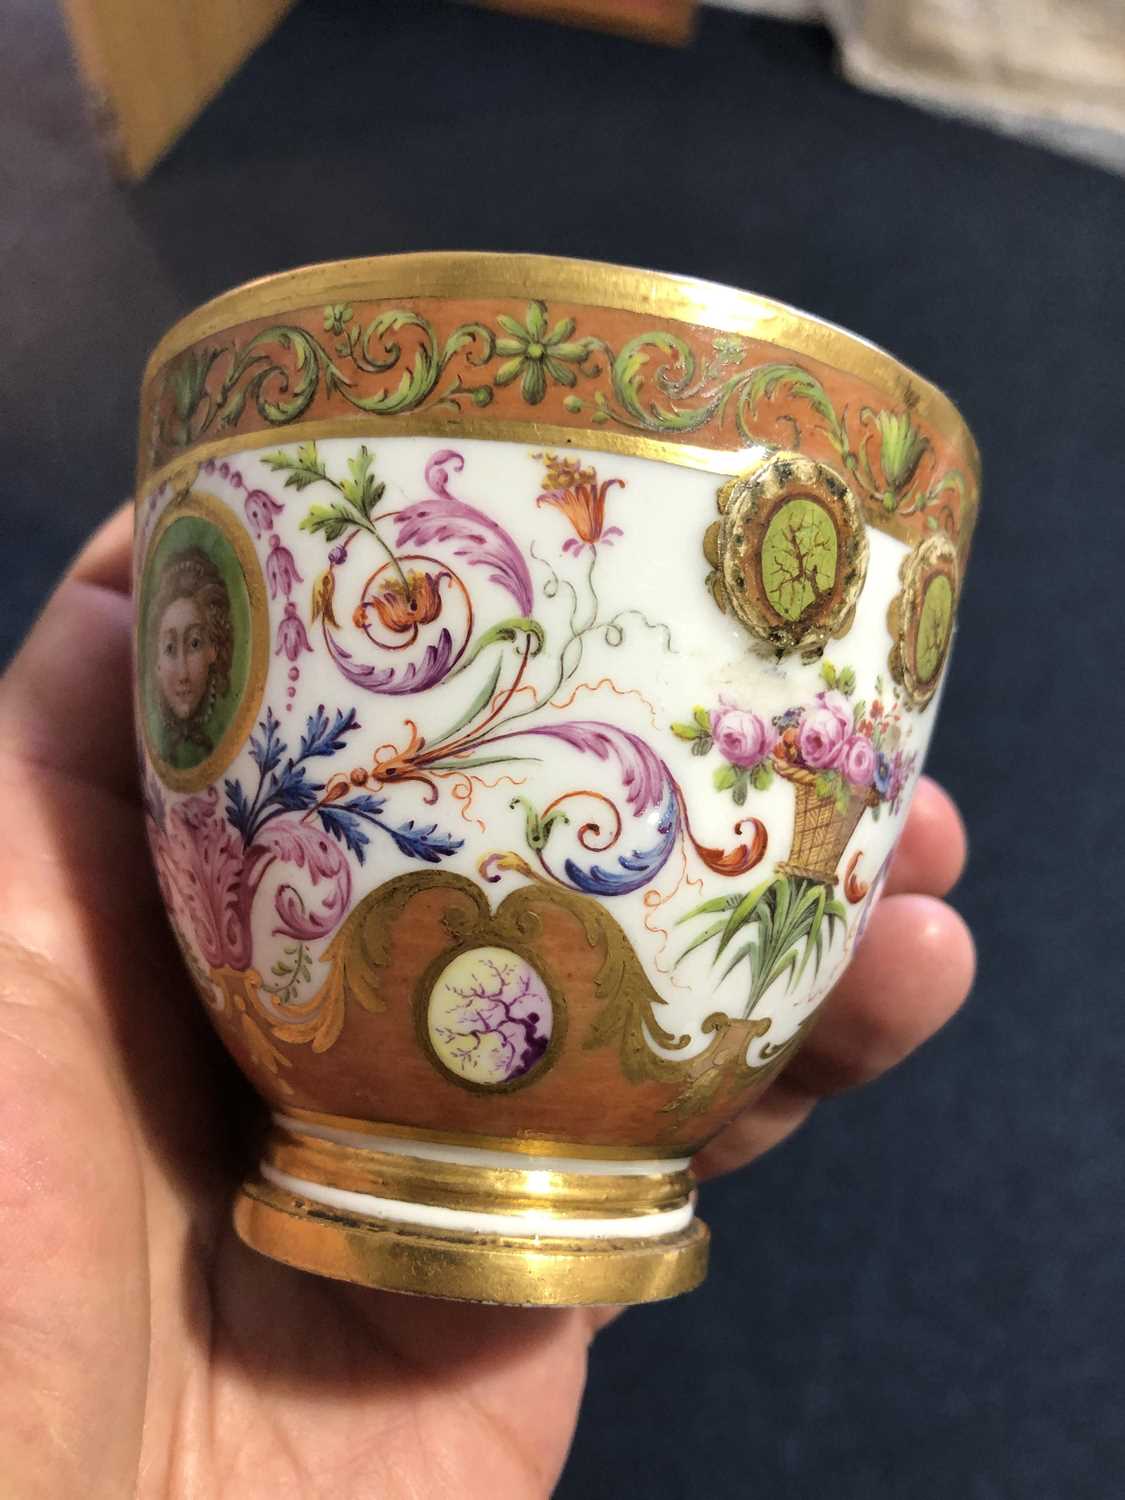 A late 18th century Serves two handled cup, with a raised central band decorated with roses and - Image 8 of 14